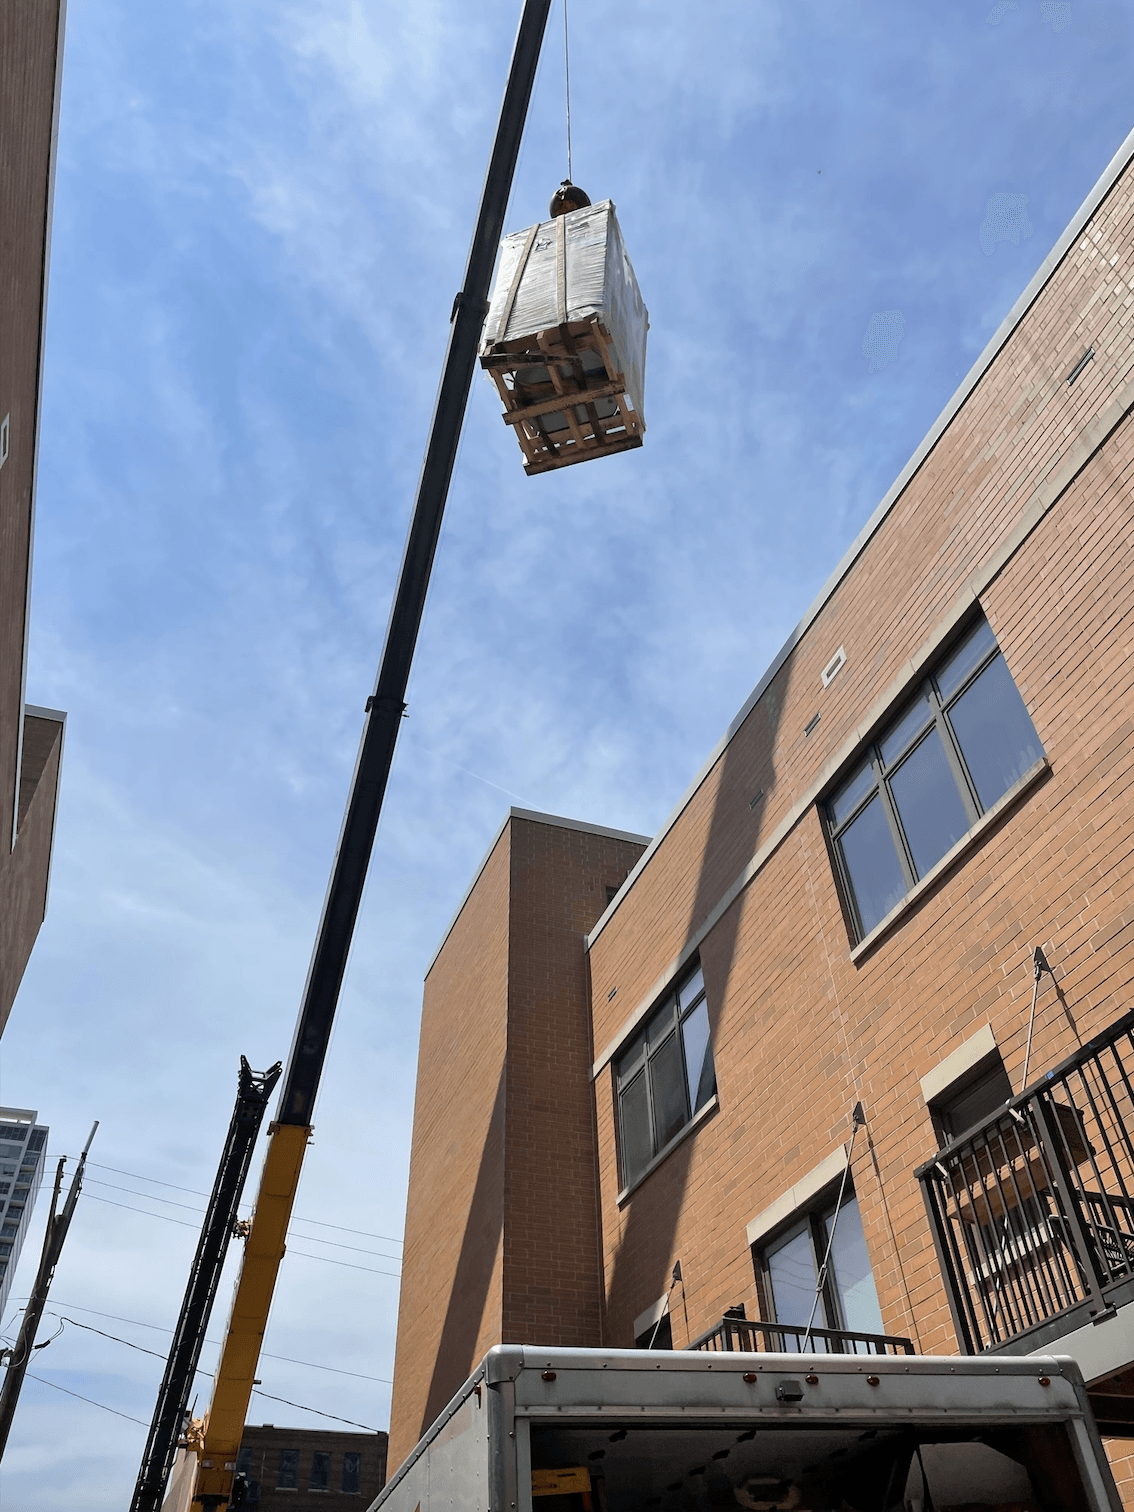 Lifting a water heater by crane